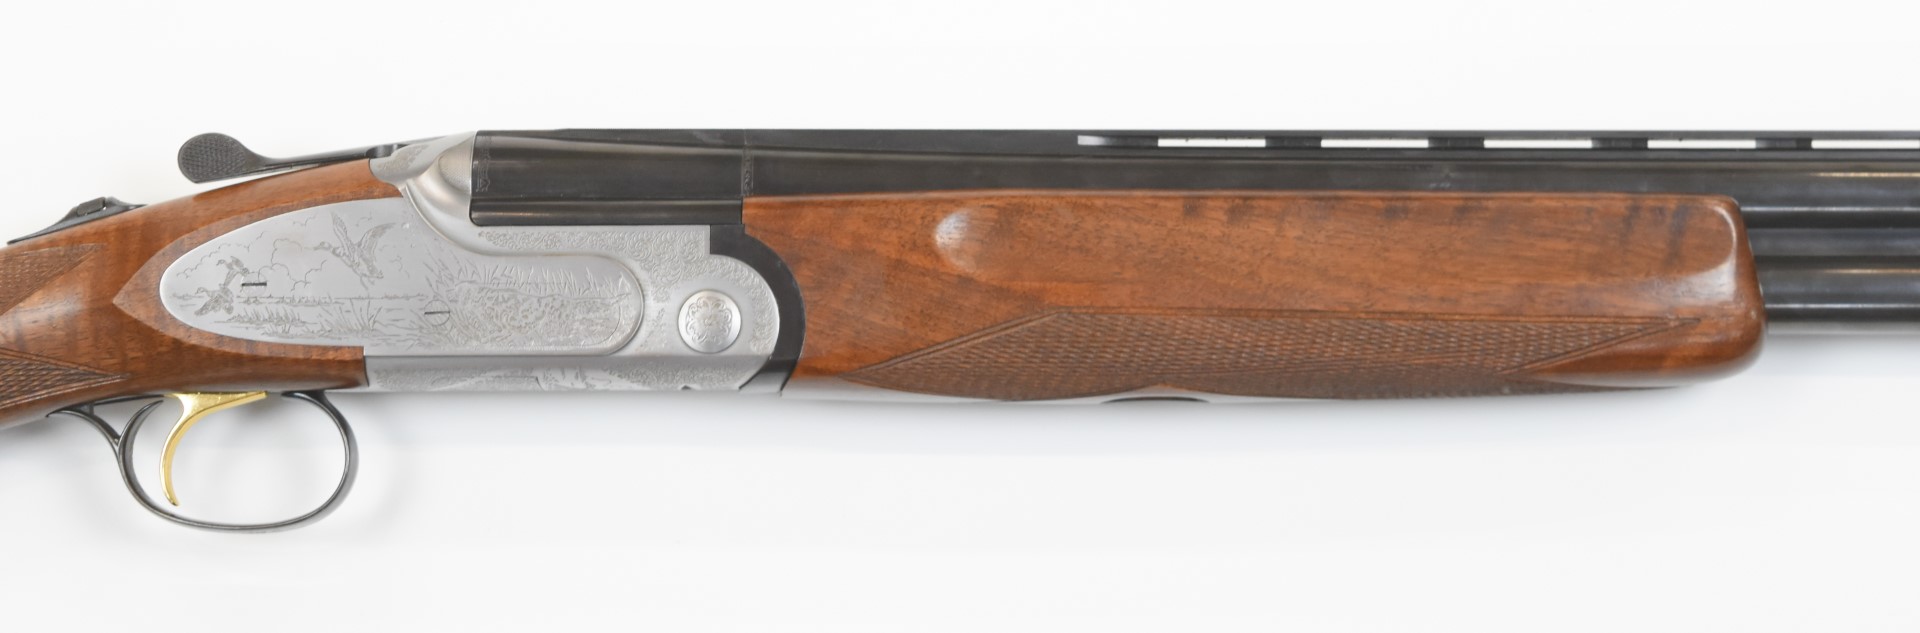 Sabatti 12 bore over under ejector shotgun with engraved scenes of birds to the sidelock plates - Image 4 of 12